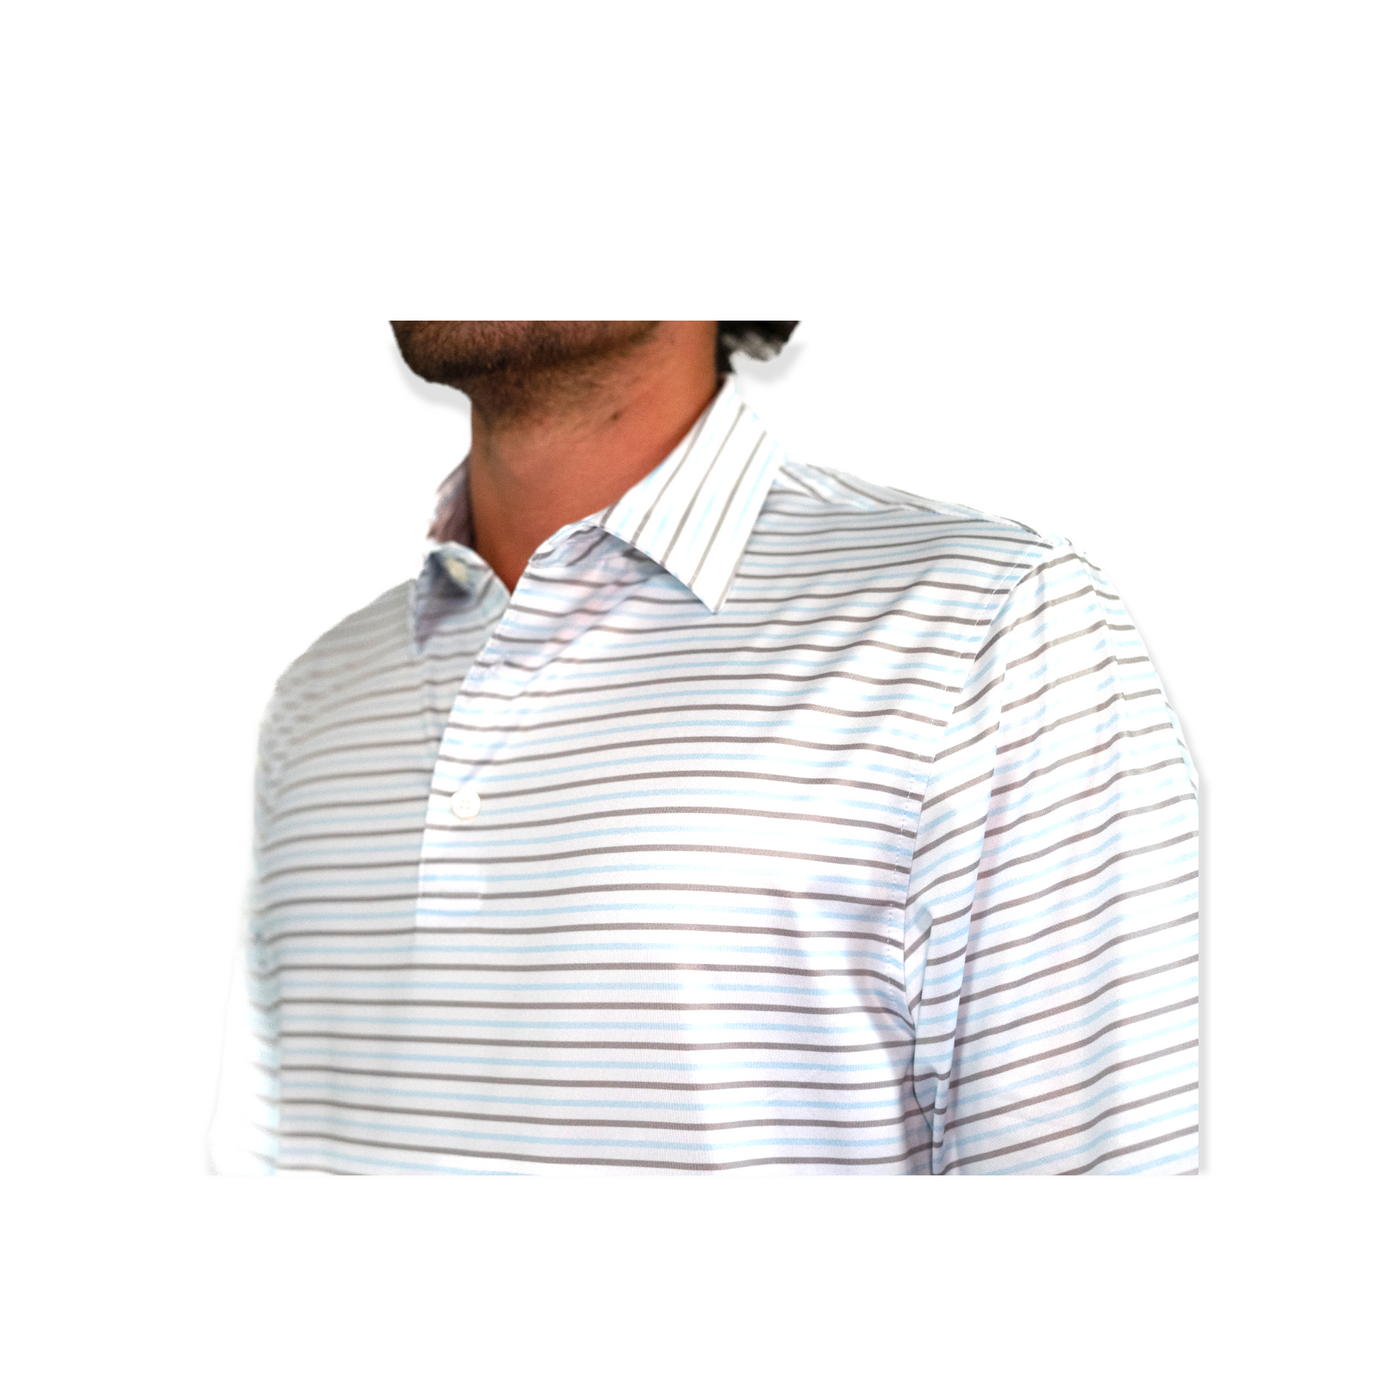 The Trophy Stripe Performance Polo